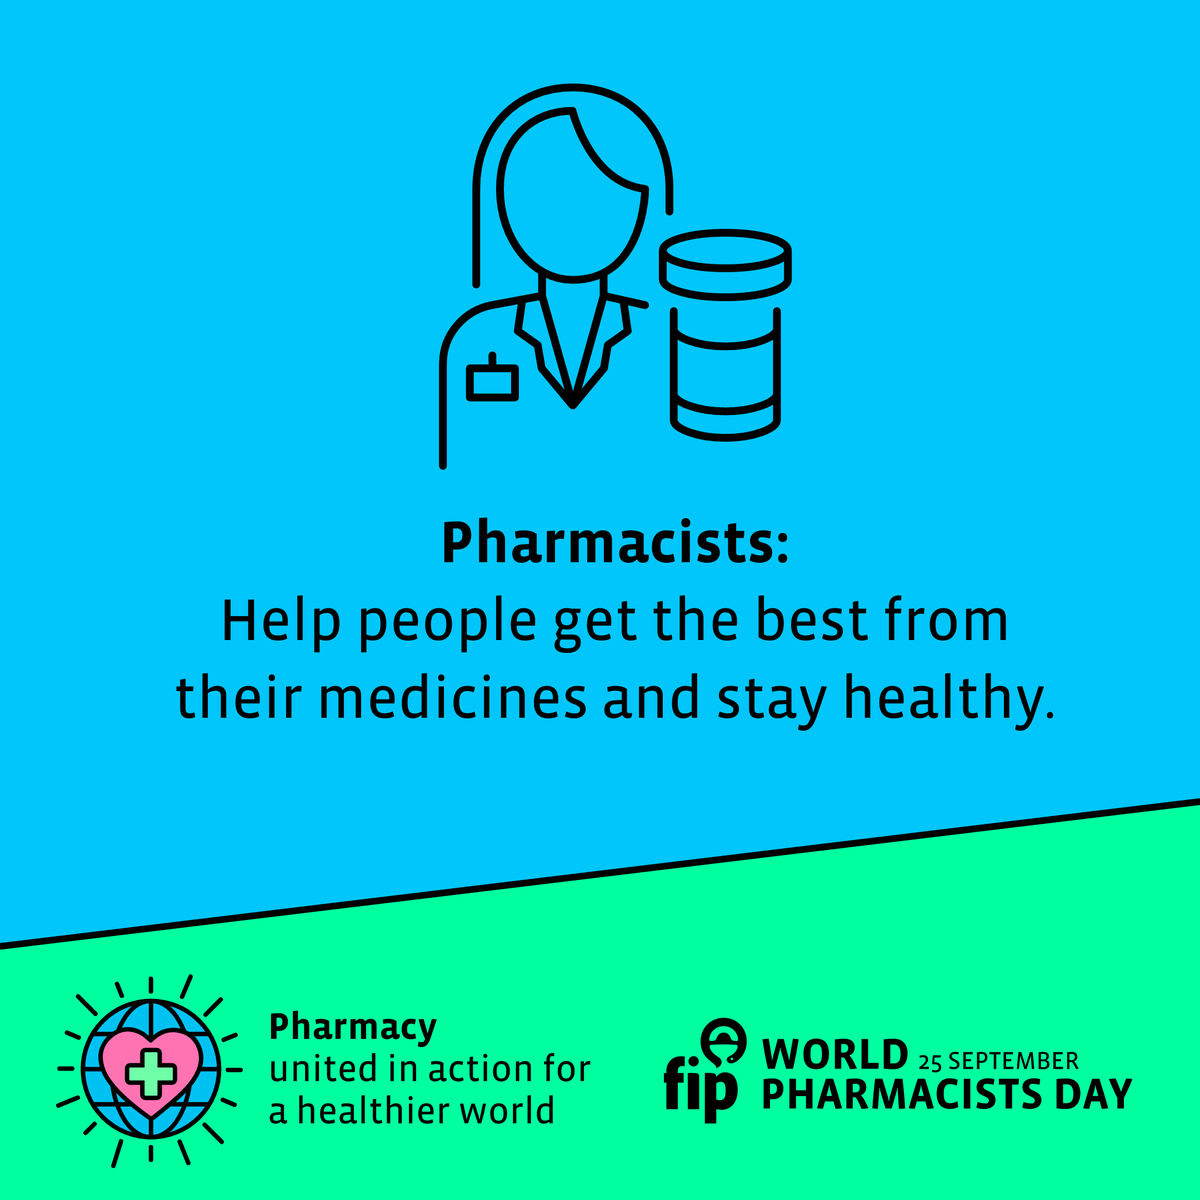 On #WorldPharmacistsDay #WPD2022 I'm paying tribute to all #pharmacists and #pharmacy teams who are united in action for a healthier world.
I would also like to say #ThankYou to organisations who are there to support pharmacists at times of need, including @PharmaSupport